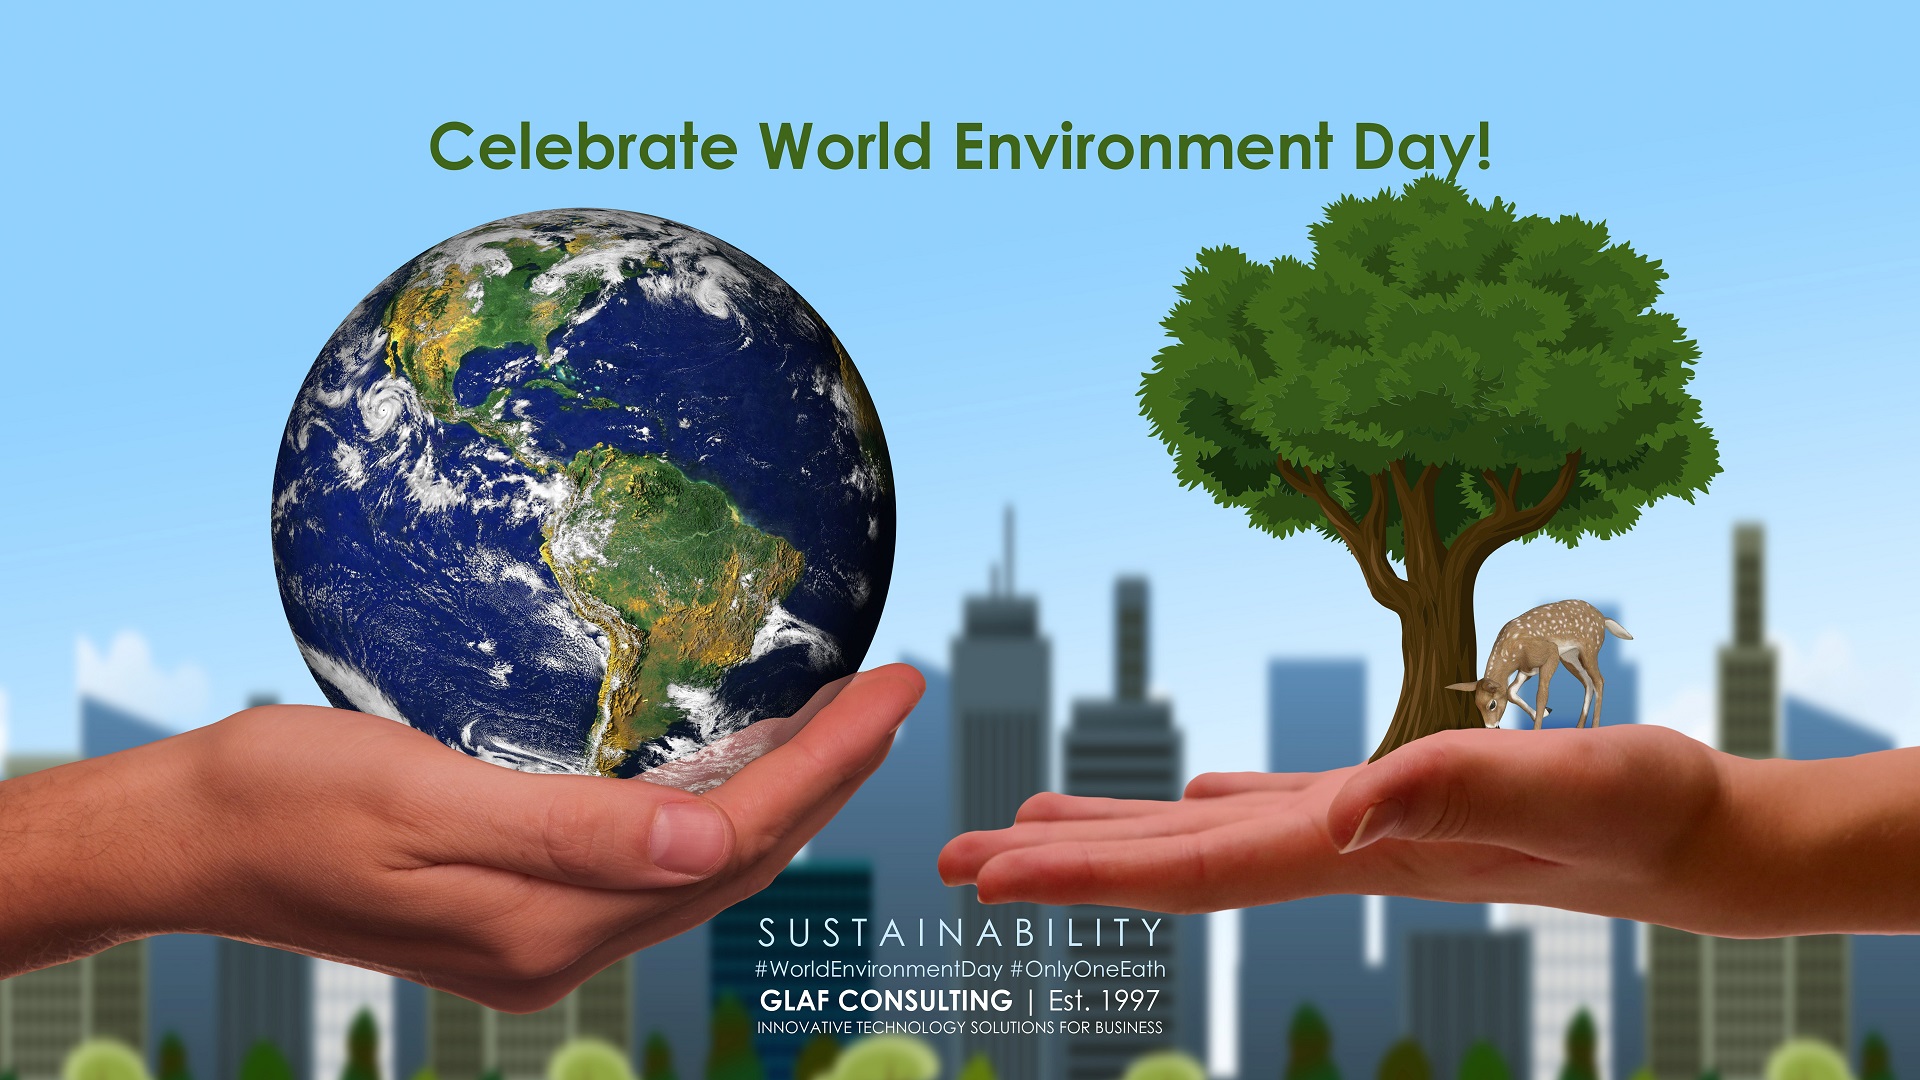 Celebrate World Environment Day! | GLAF CONSULTING®